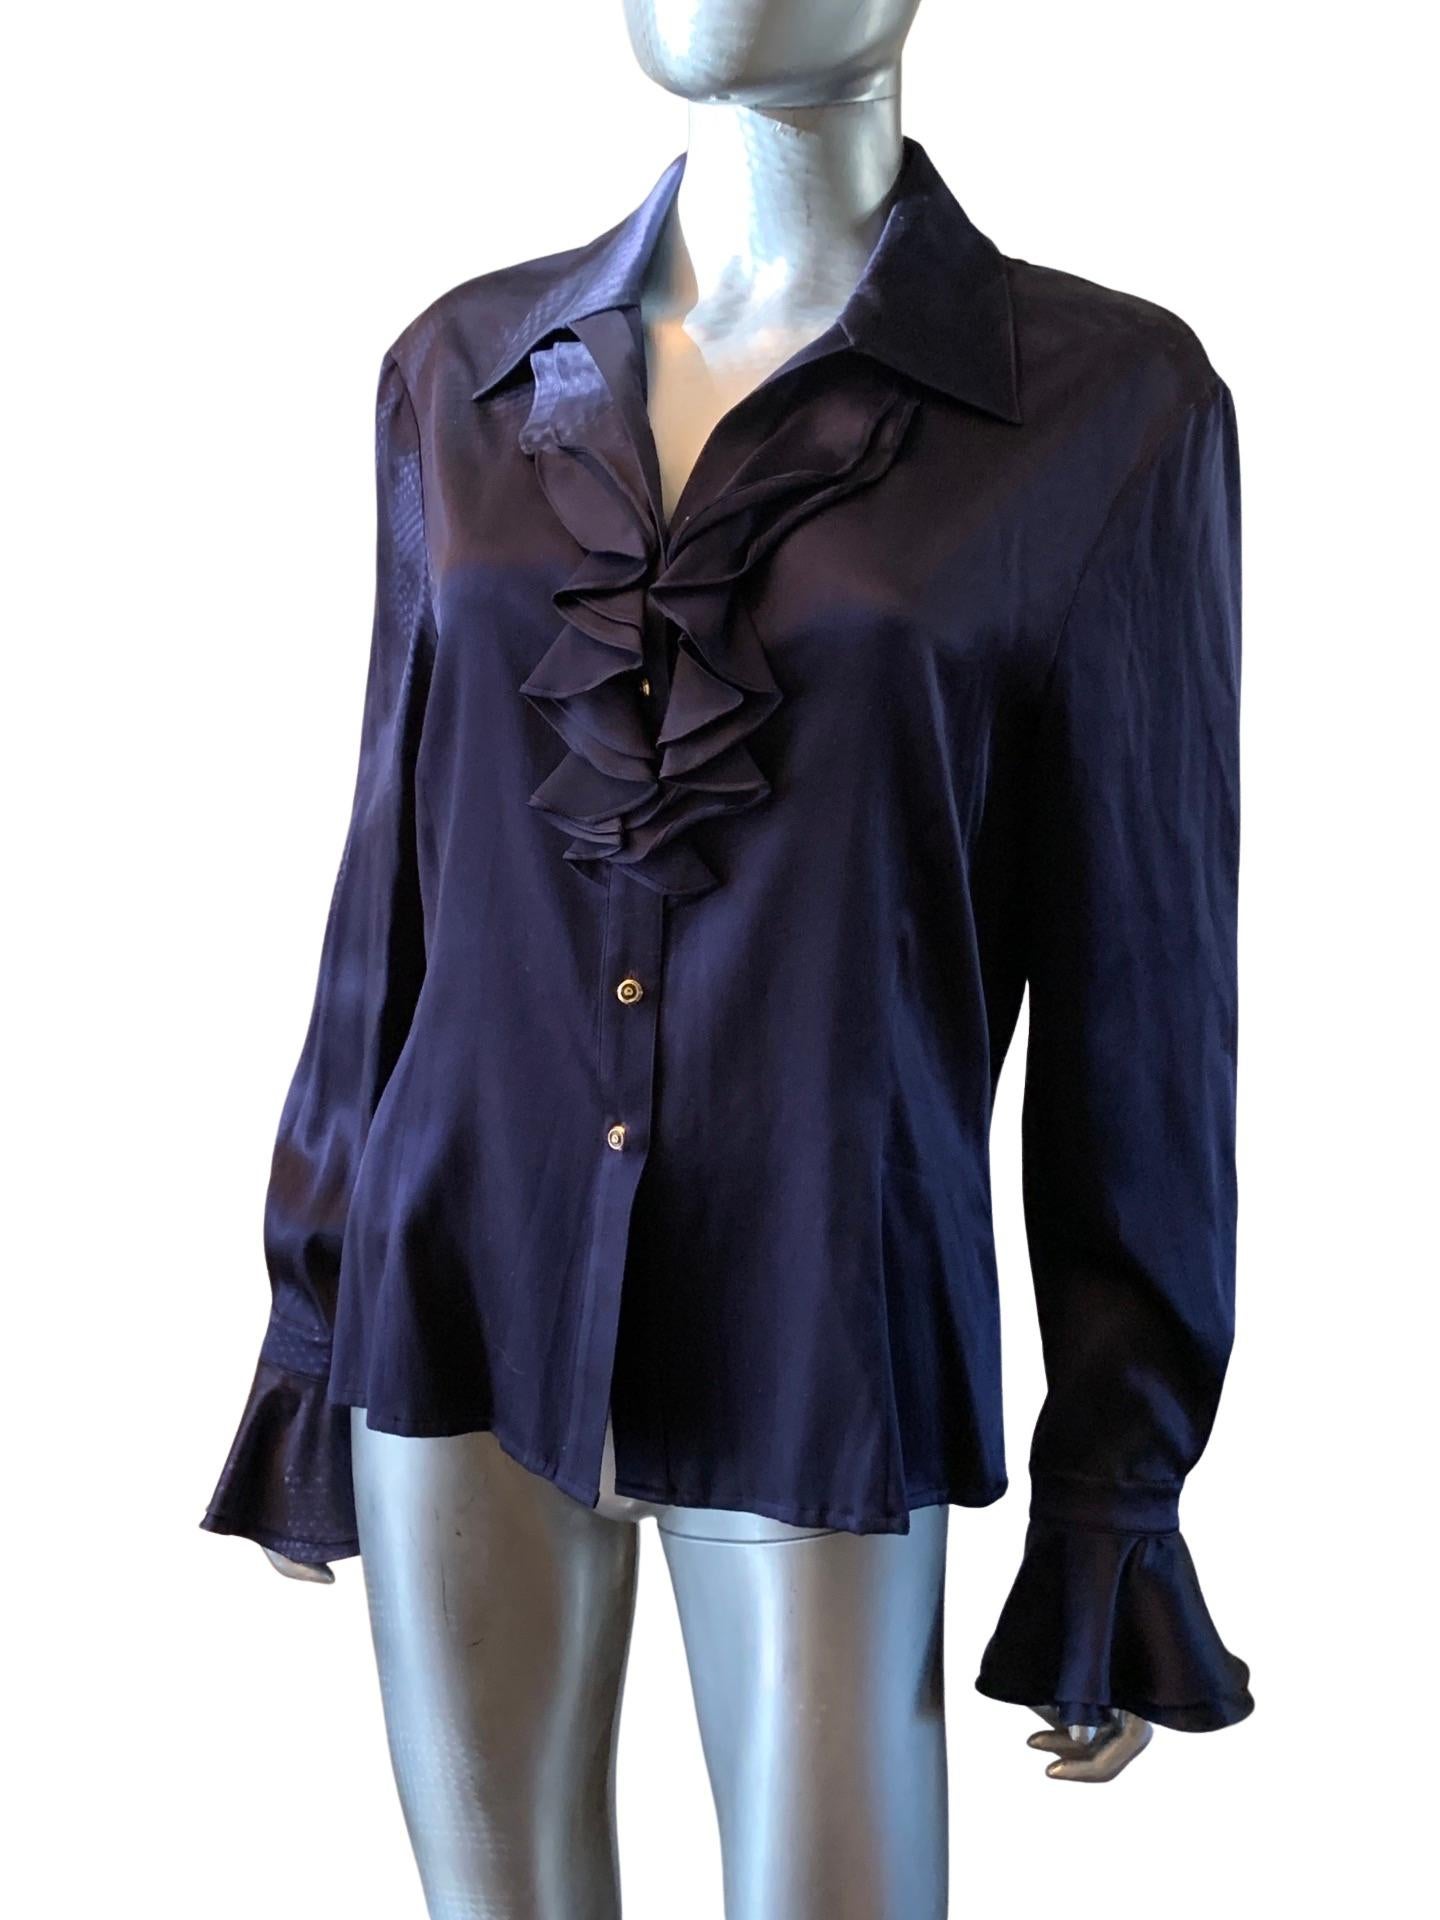 A very chic St. John silk charmeuse blouse In the most beautiful shade of navy. The blouse has a slight V-neck with ruffled flounces on the side and beautiful ruffled cuffs. The blouse obtains the original signature St. John buttons. Size 10. New